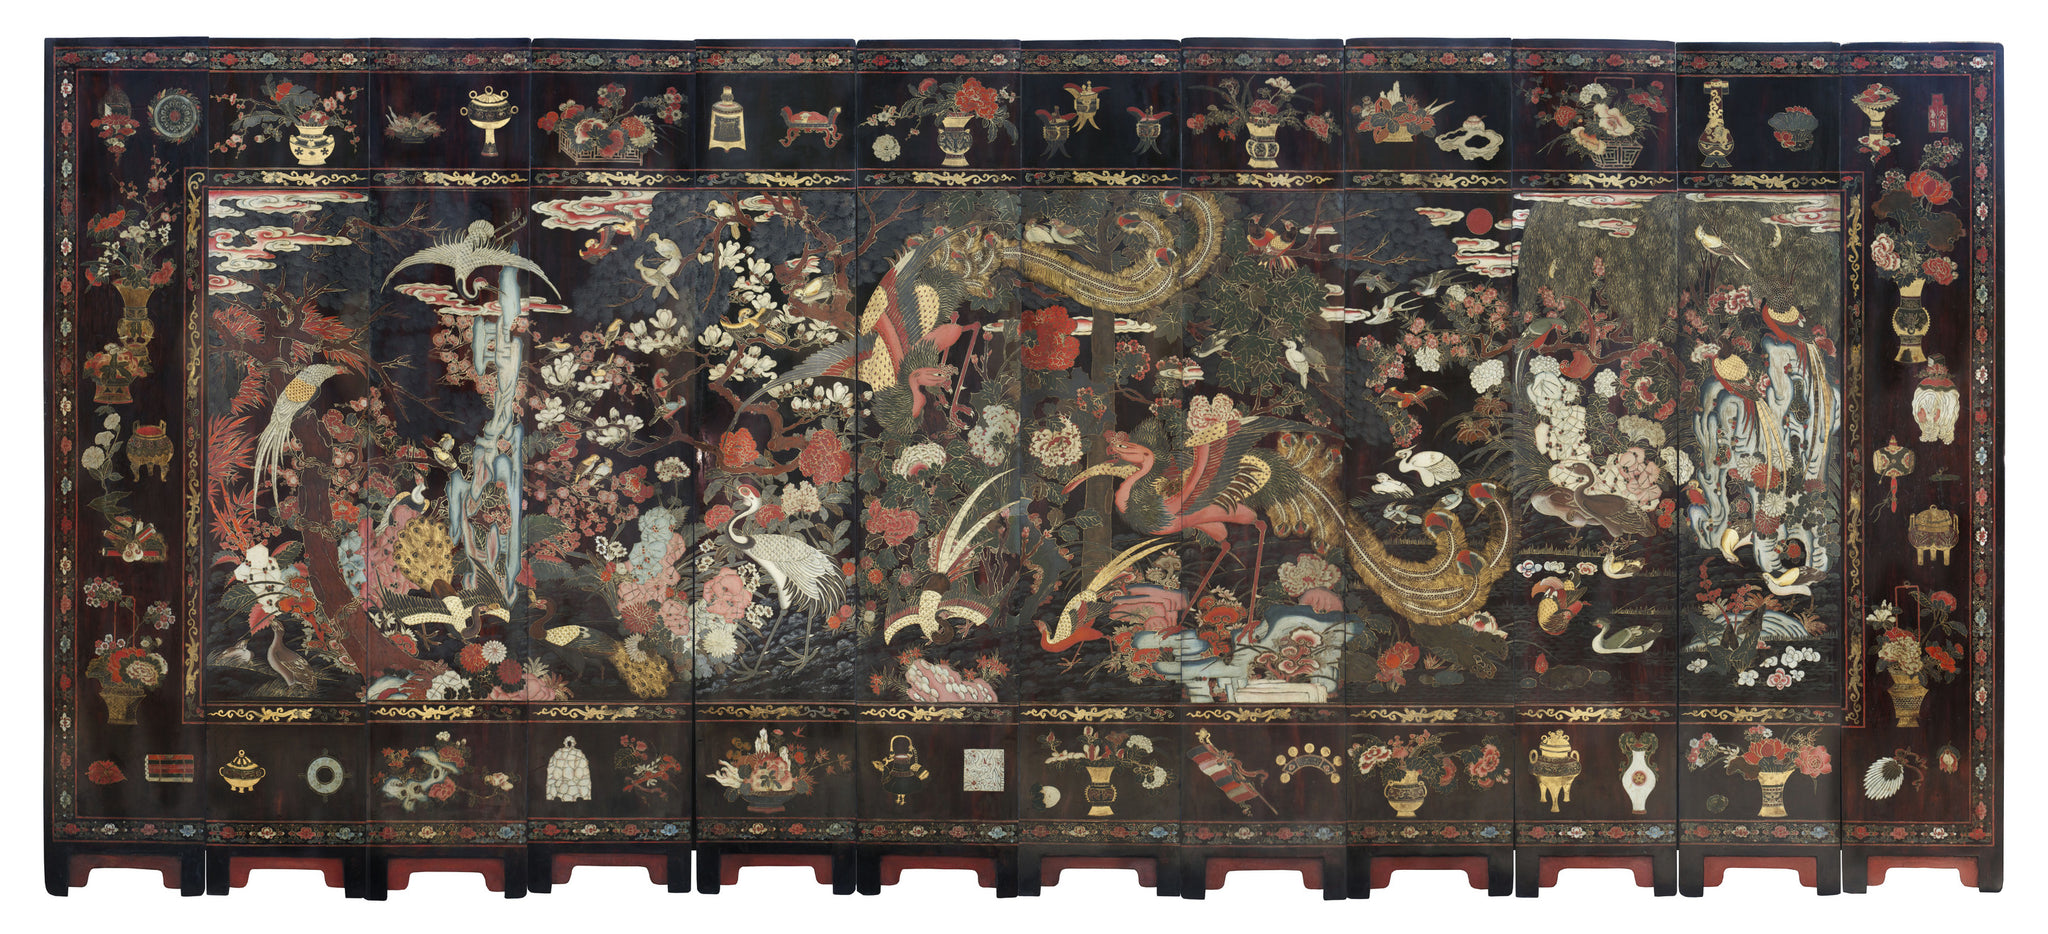 A RARE TWELVE PANEL POLYCHROME LACQUER SCREEN China,  Kangxi Period (1661-1722)  Early 18th Century